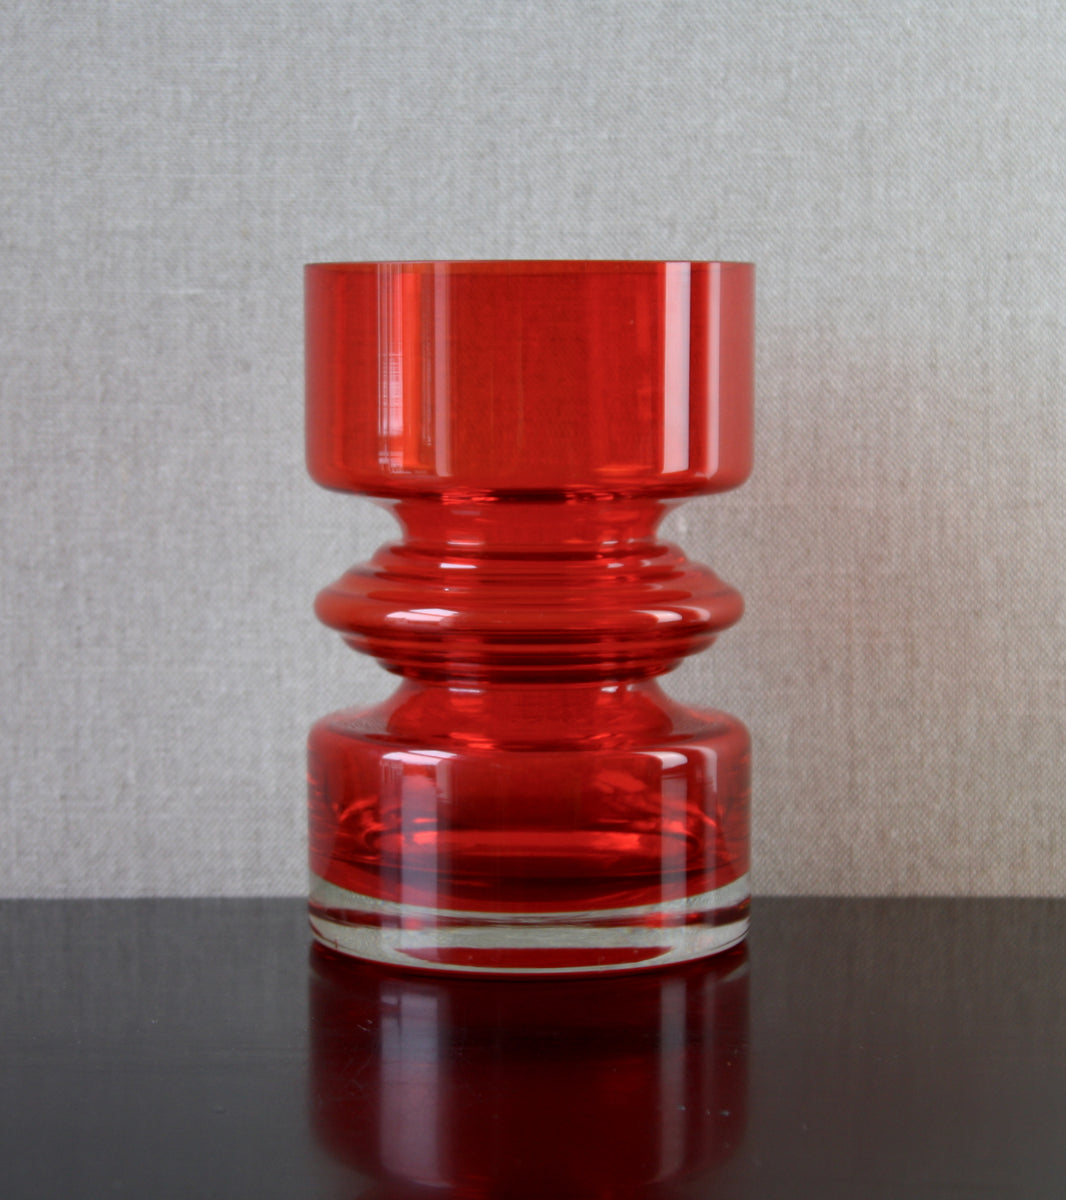 Ruby Red Model 1442 "Tiimalasi" (Hourglass) Vase by Nanny Still, 1970